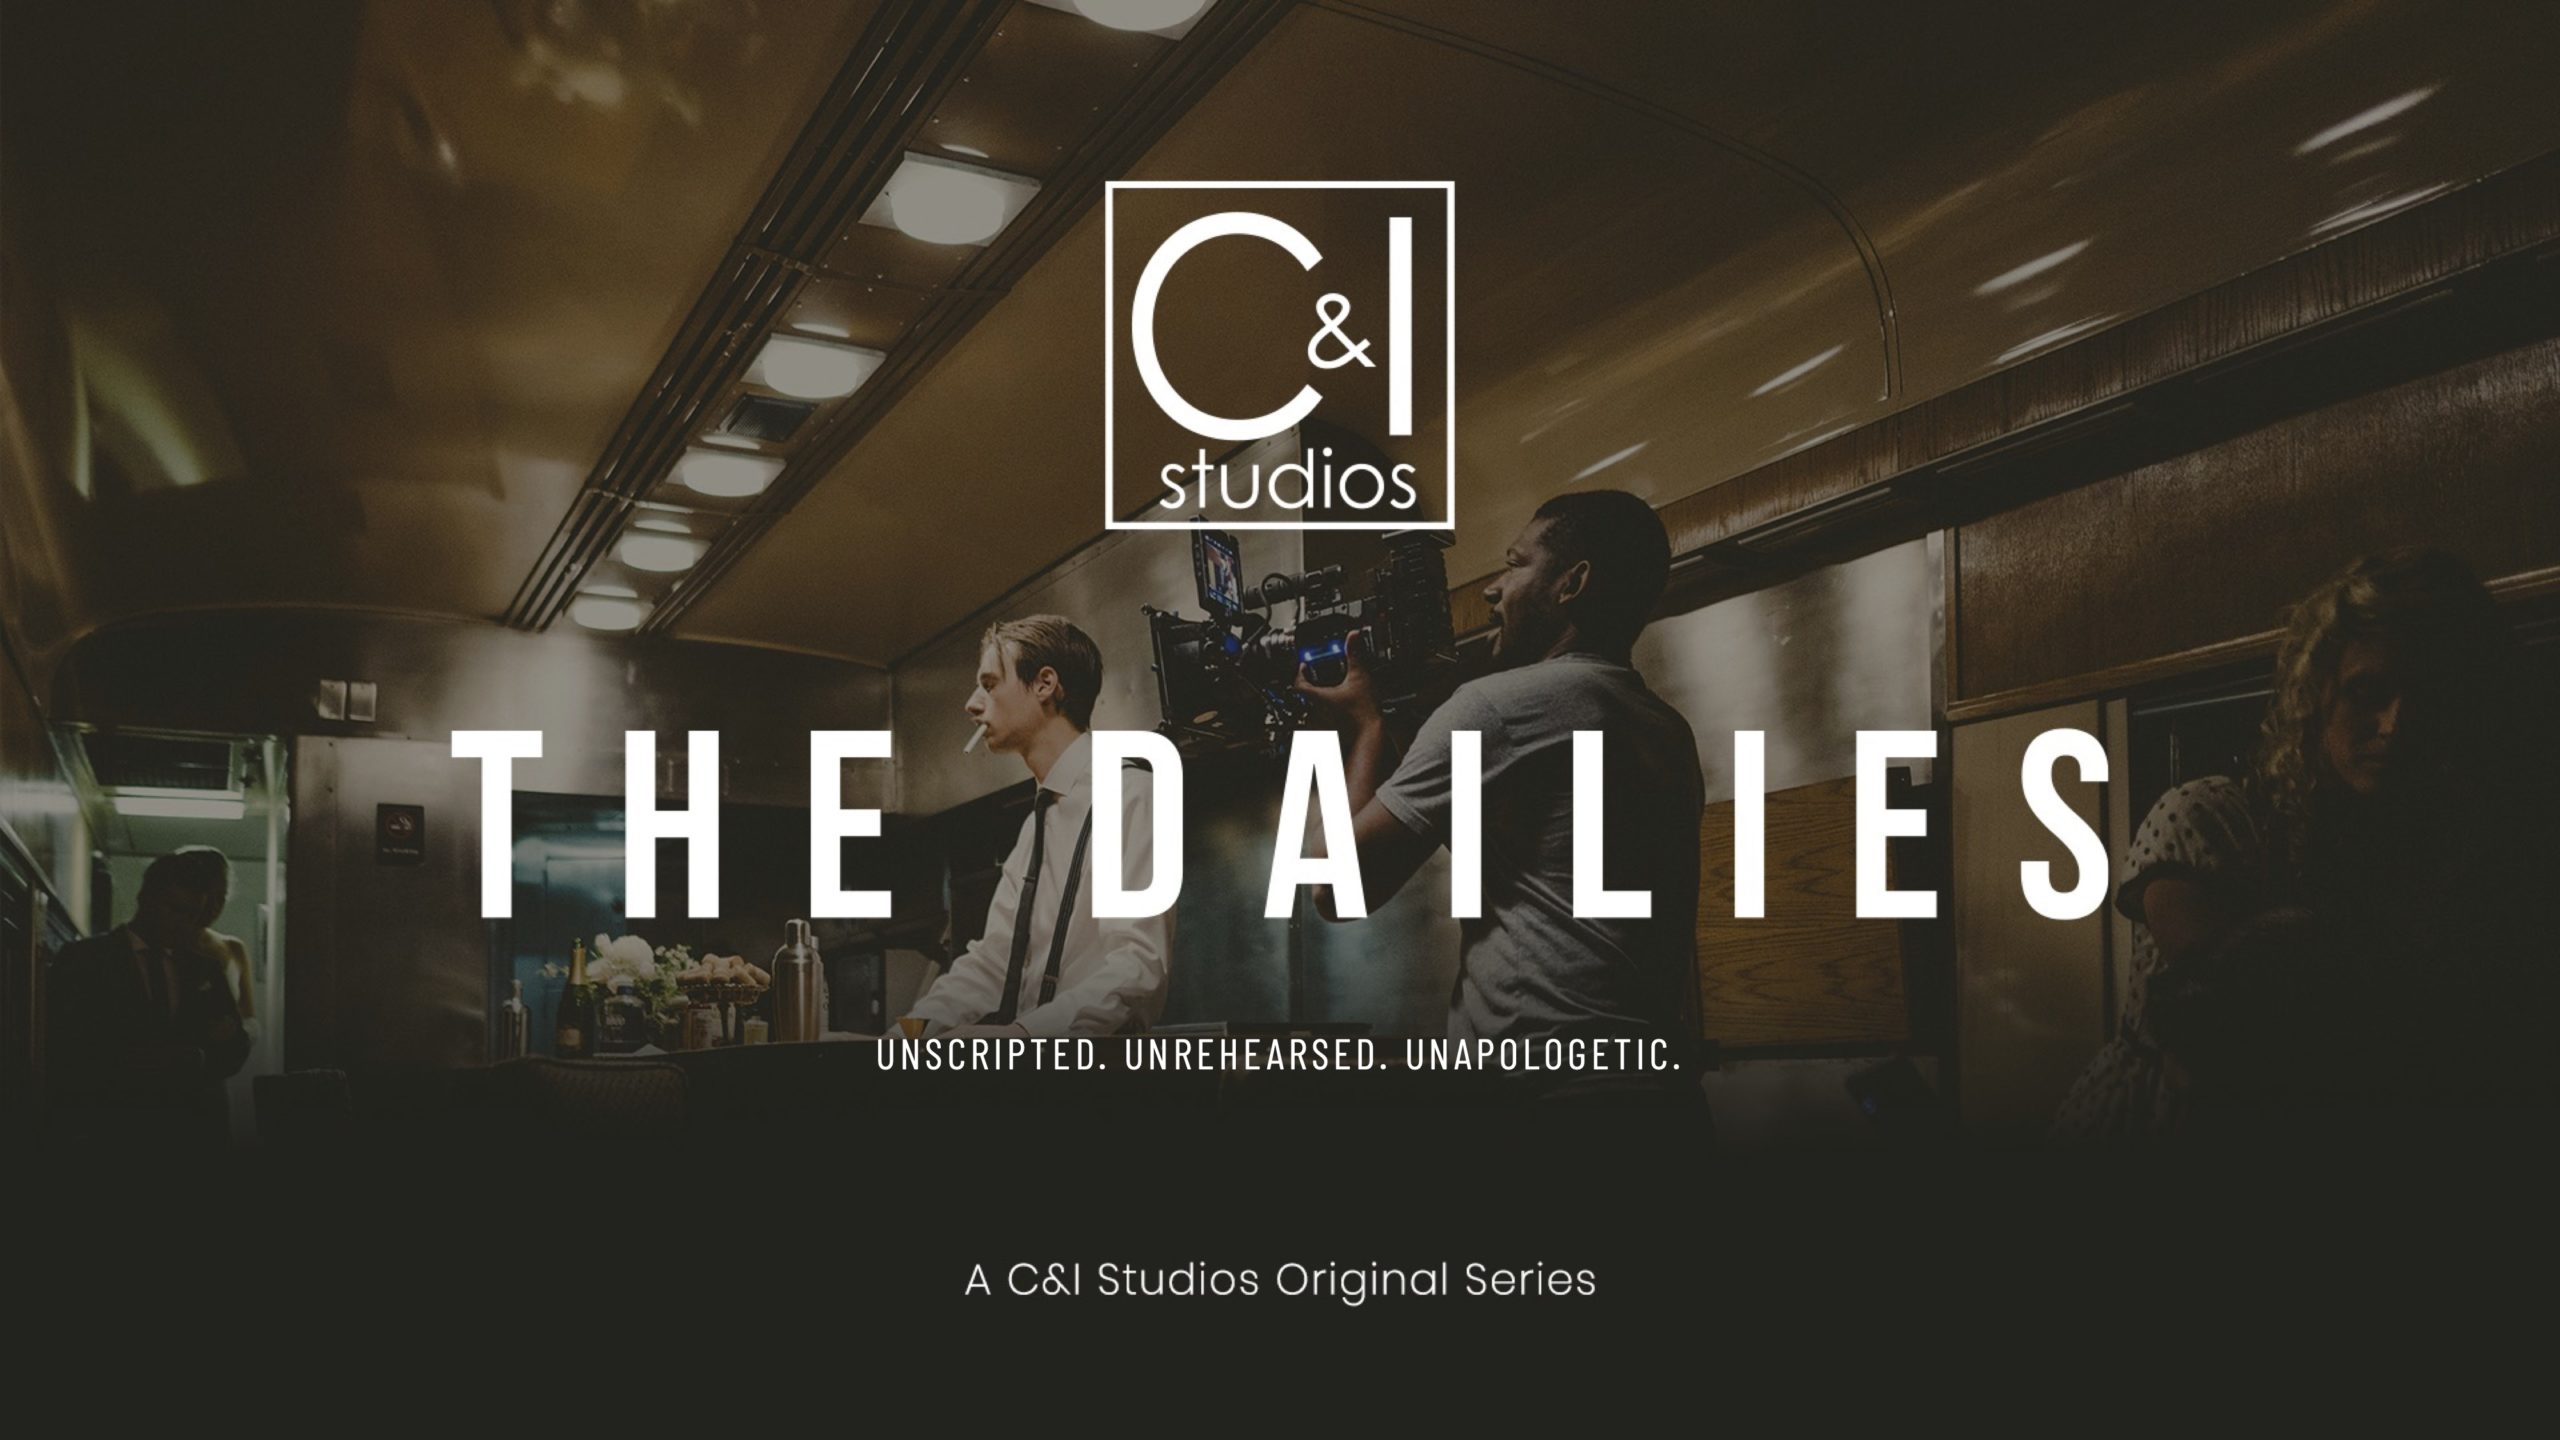 C&I Studios The Dailies Unscripted Unrehearsed Unapologetic Pitch Deck with videographer filming people in a train car